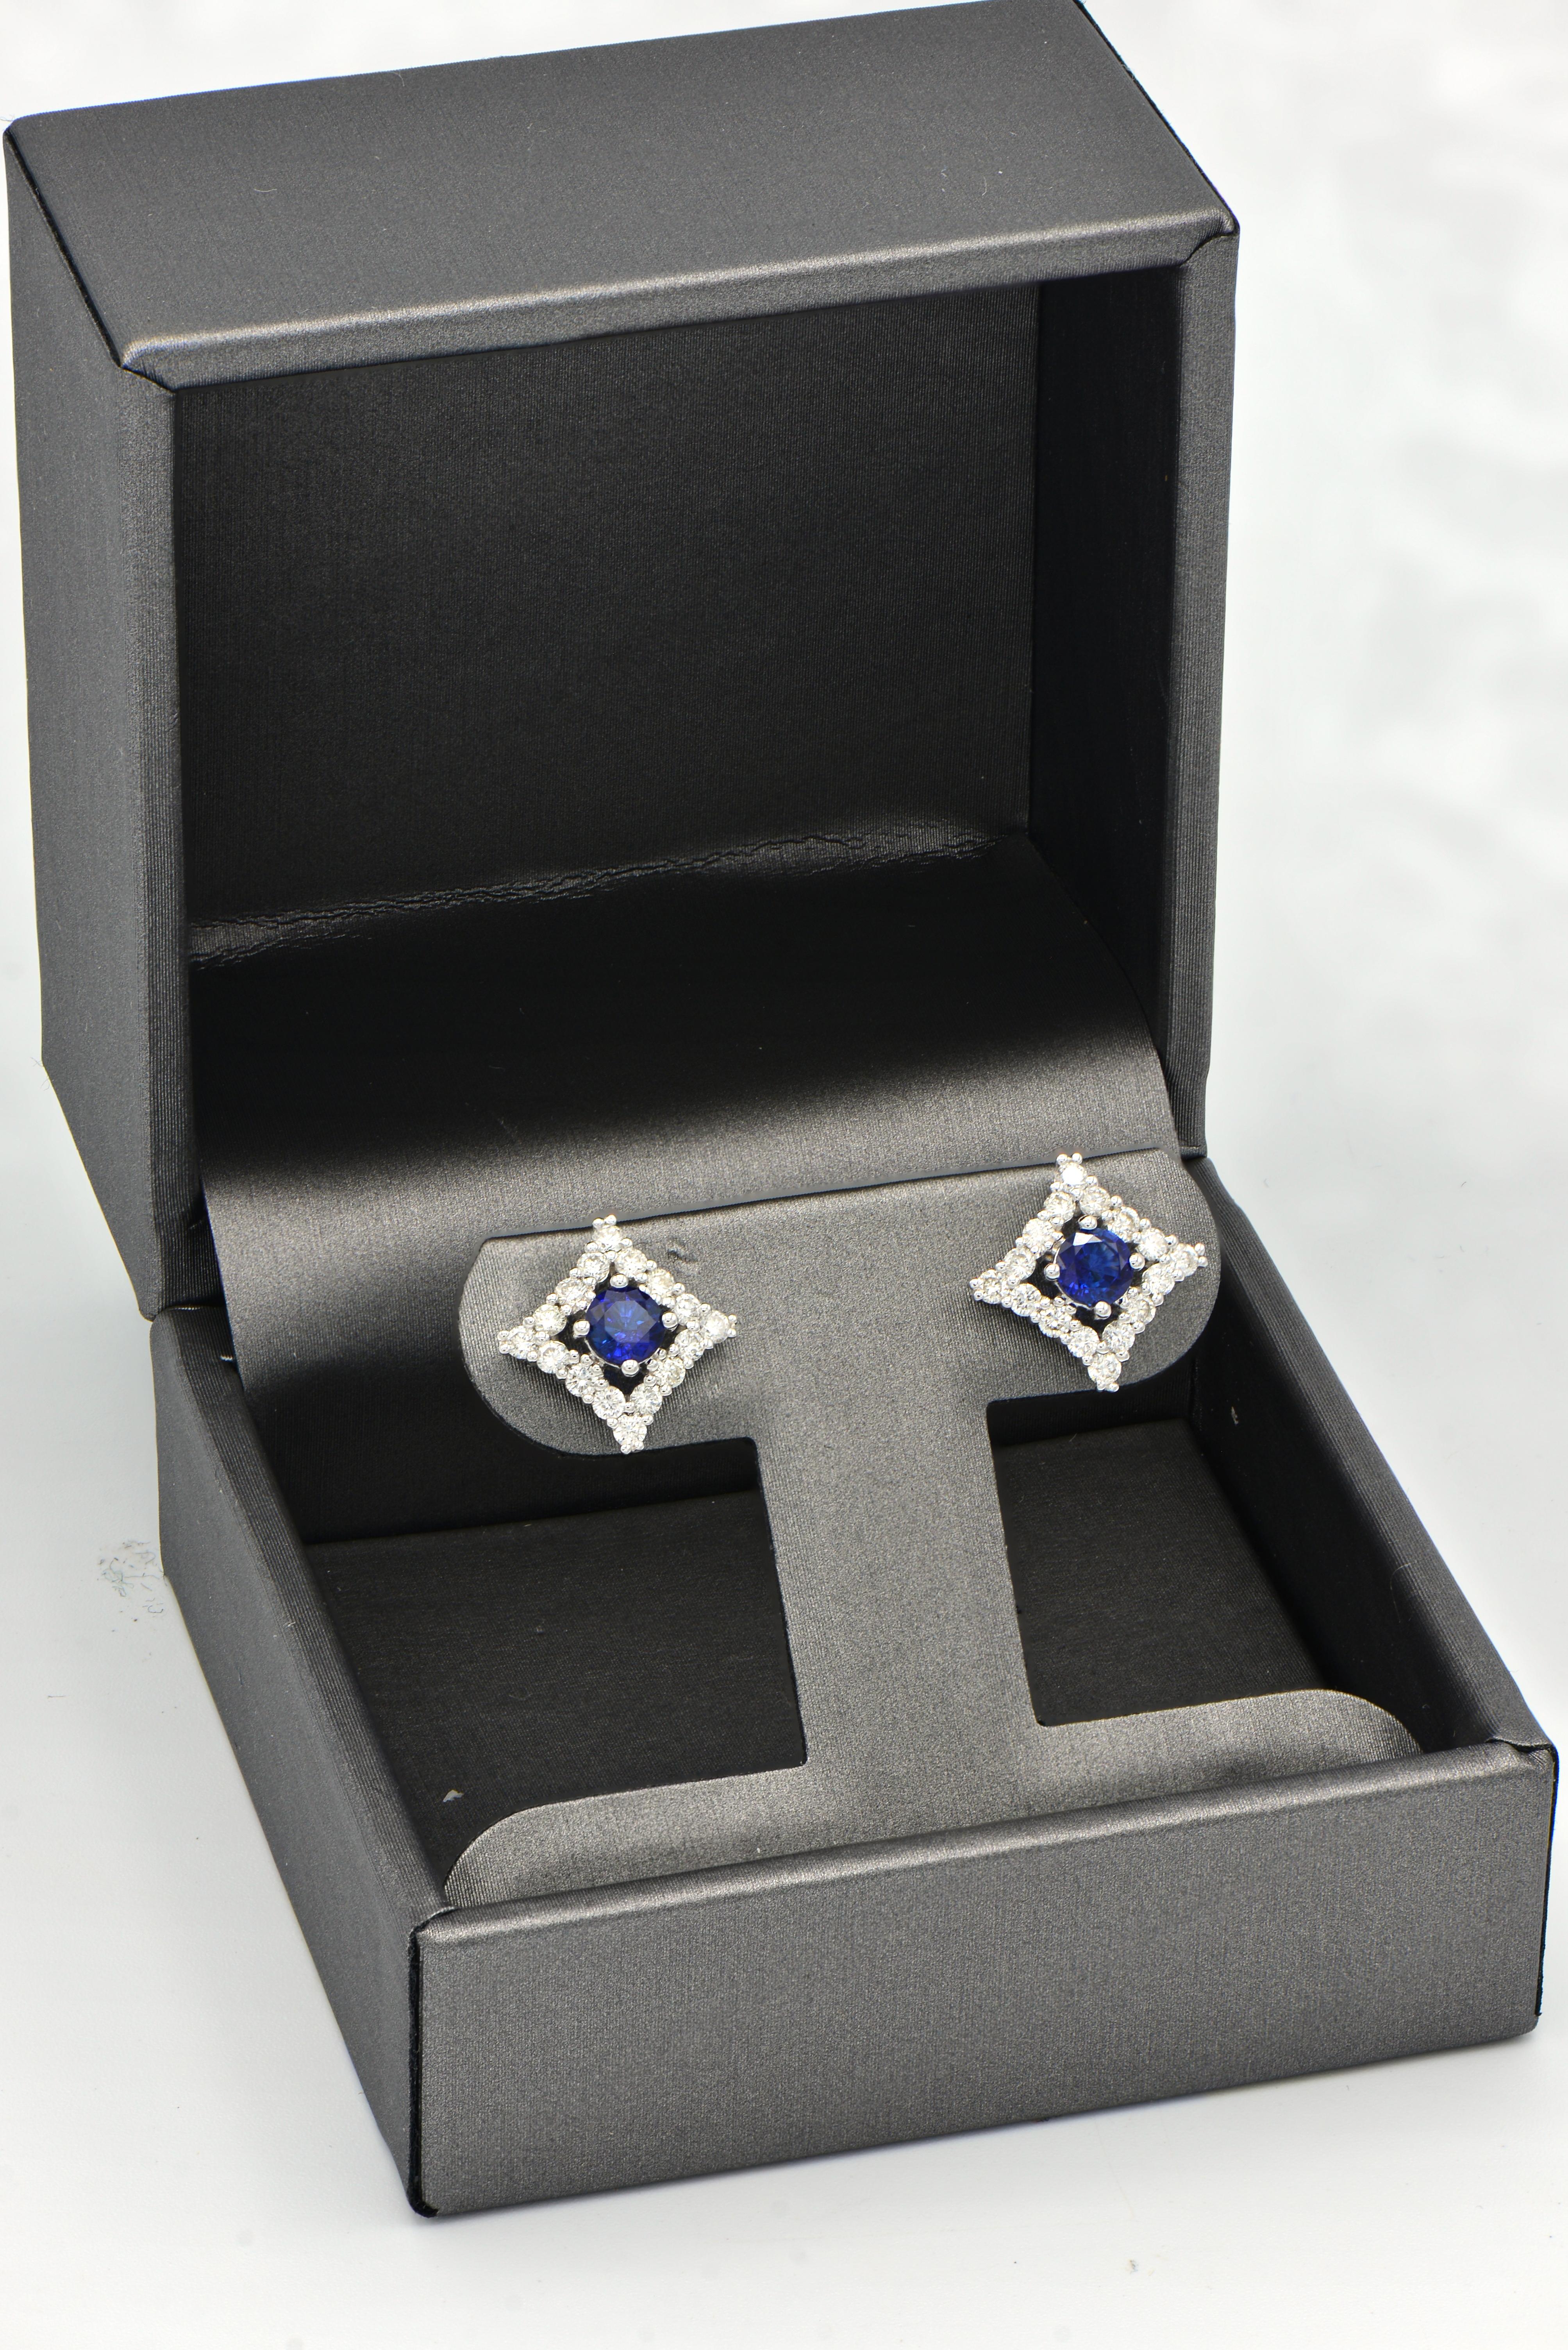 These unique Sapphire and Diamond earrings are sure to turn heads with their original shape while still maintaining comfort and ease with a standard stud back. These earrings contain royal blue sapphires totaling 0.67 carats which are surrounded by